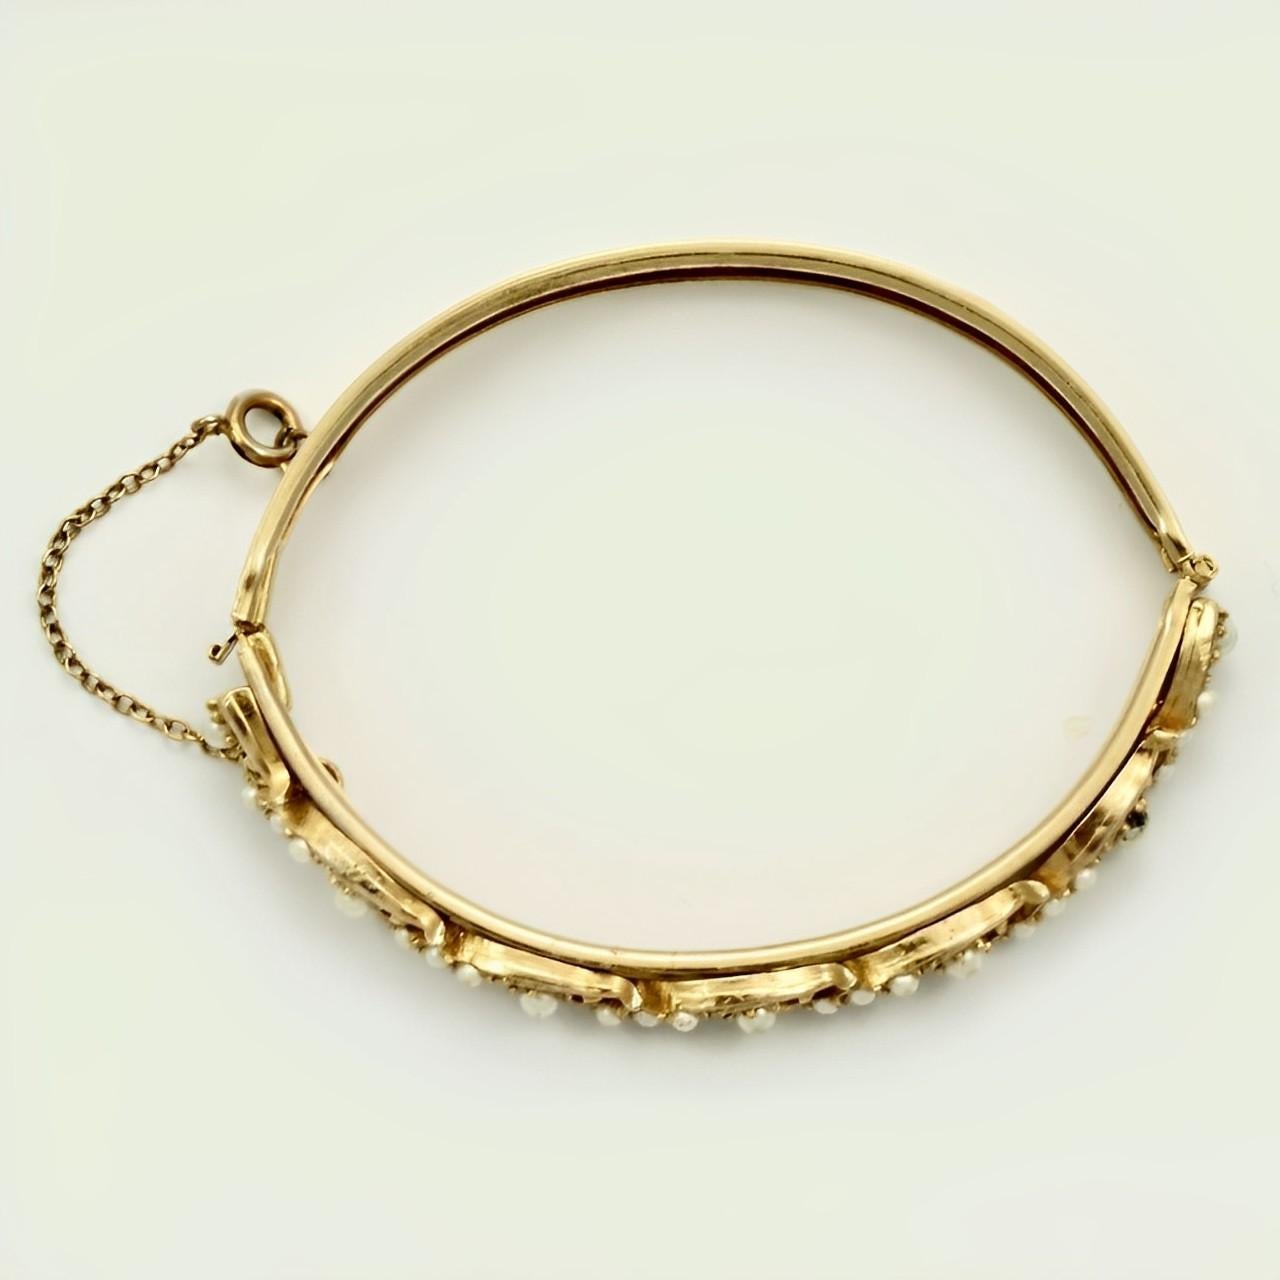 Gold Plated and Faux Pearl Bangle Bracelet circa 1950s For Sale 2